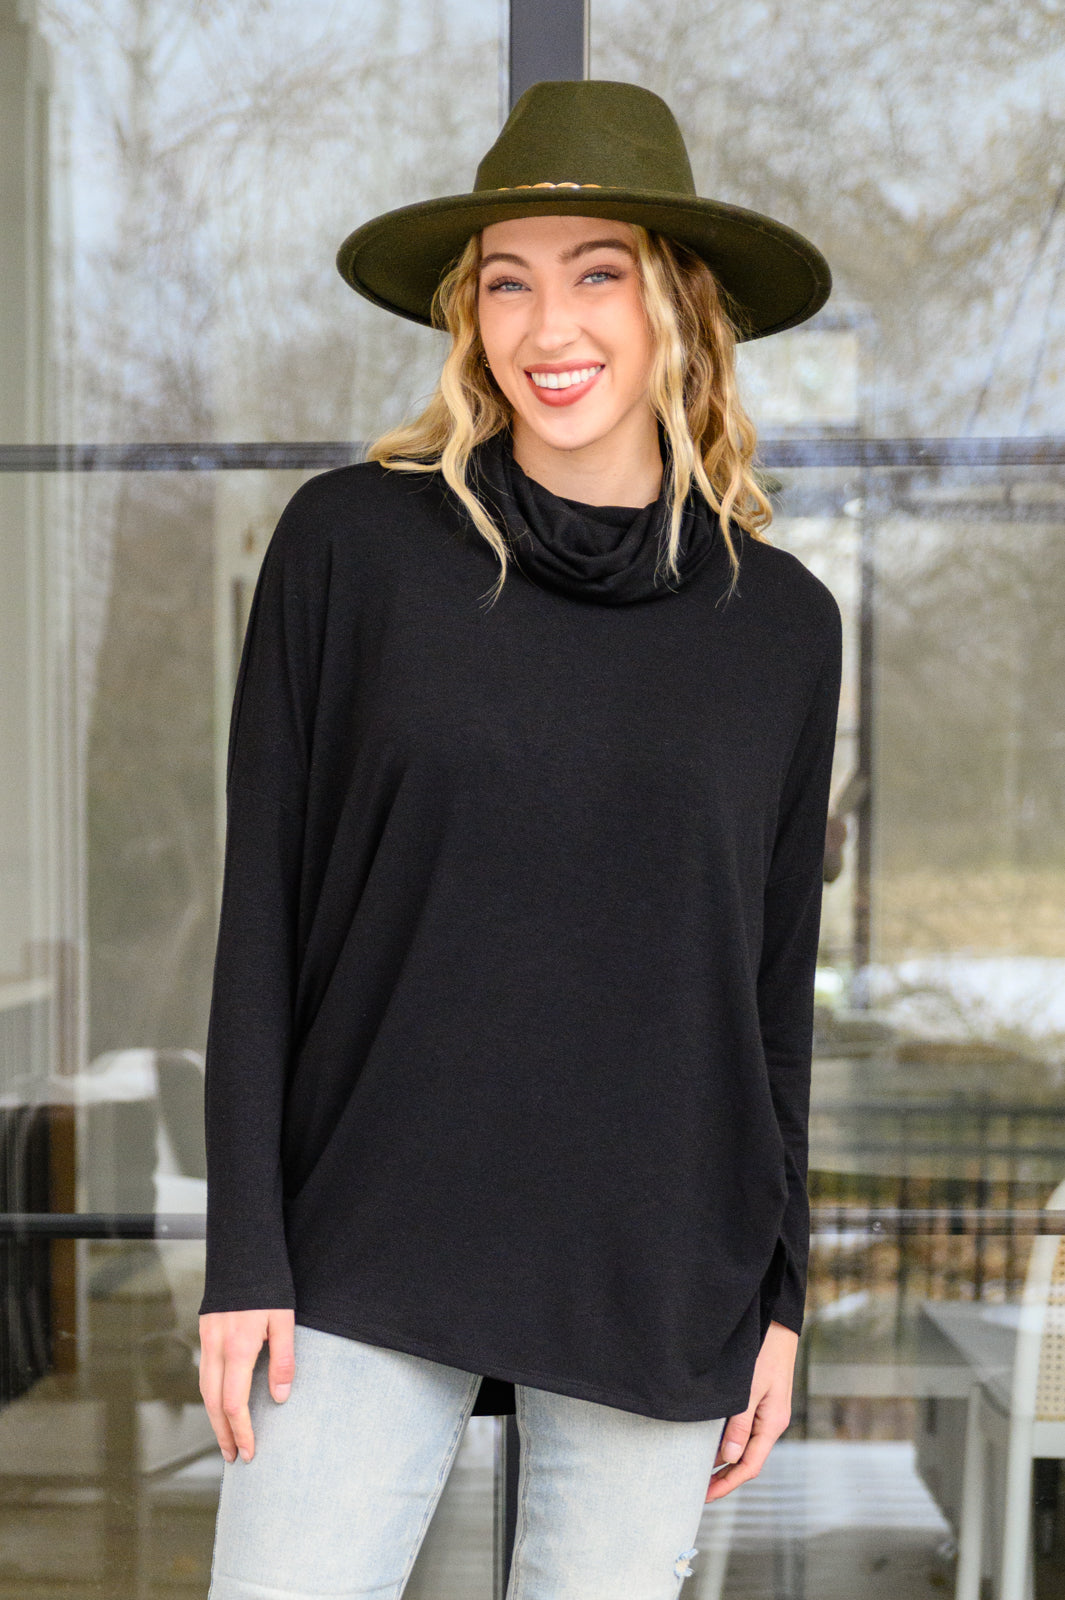 Hilton Cowl Neck Long Sleeve Top in Black (Online Exclusive)